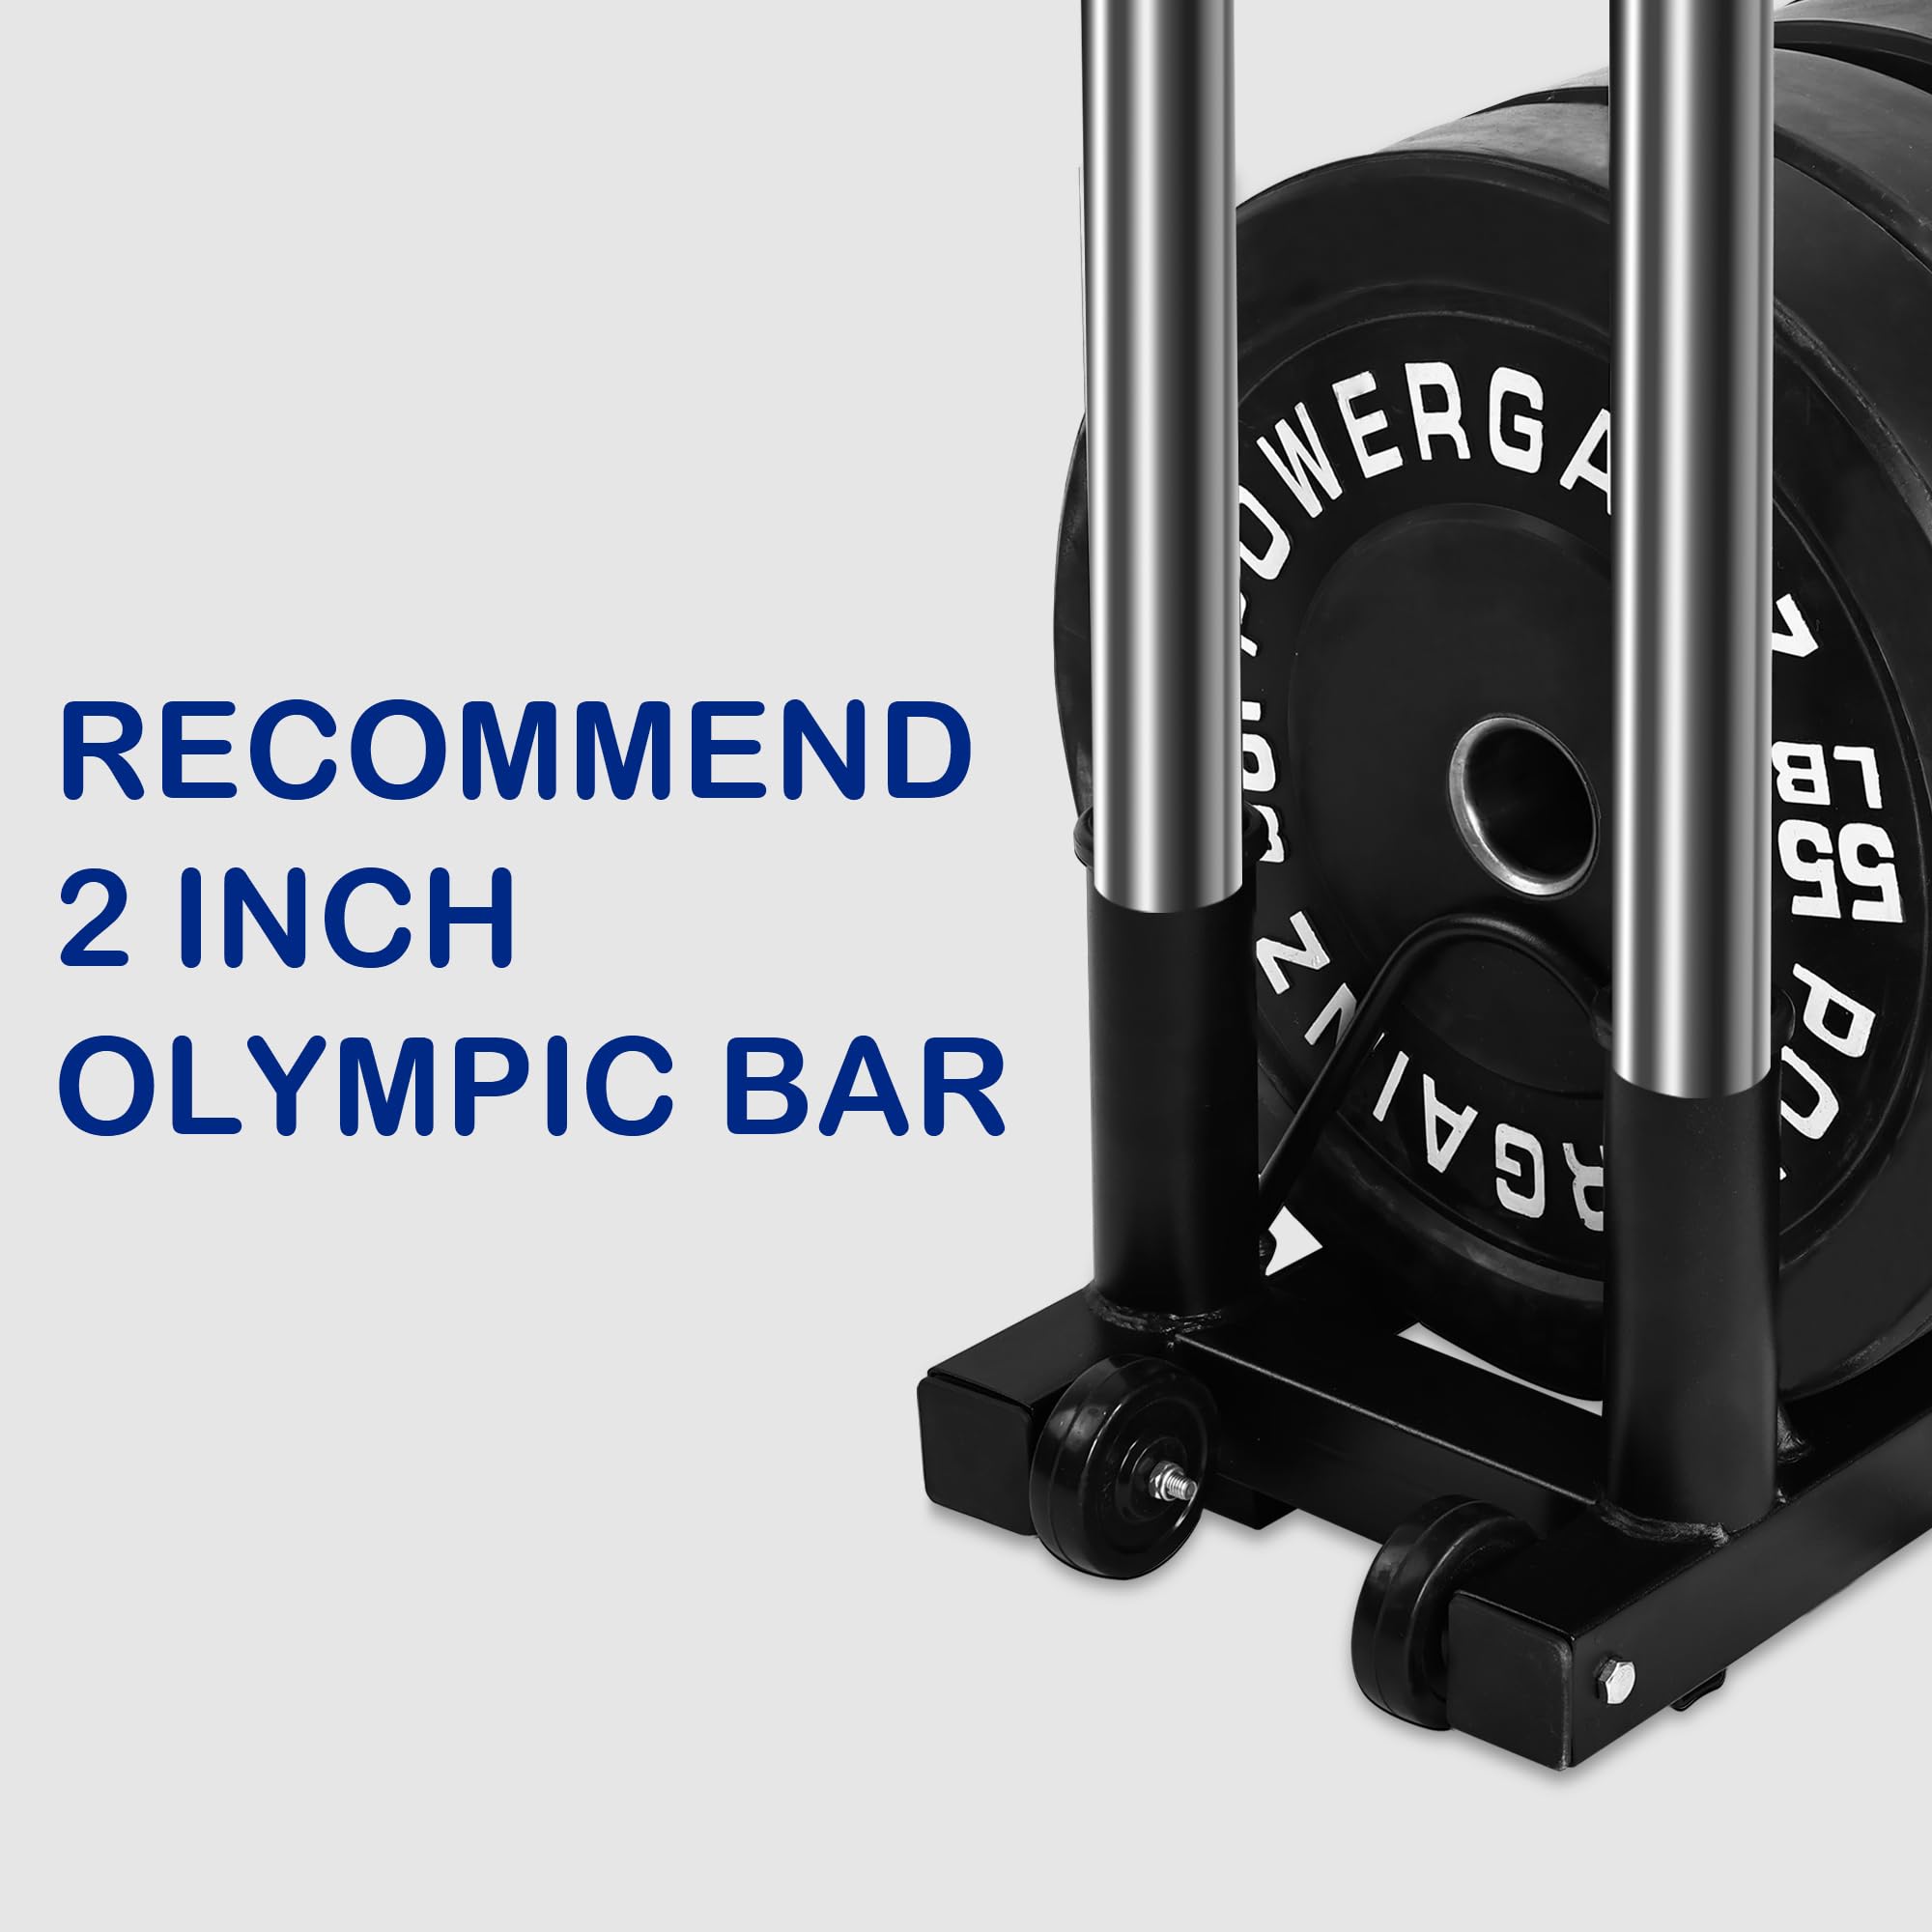 Signature Fitness Horizontal Plate and Olympic Bar Rack Organizer with Steel Frame and Transport Wheels